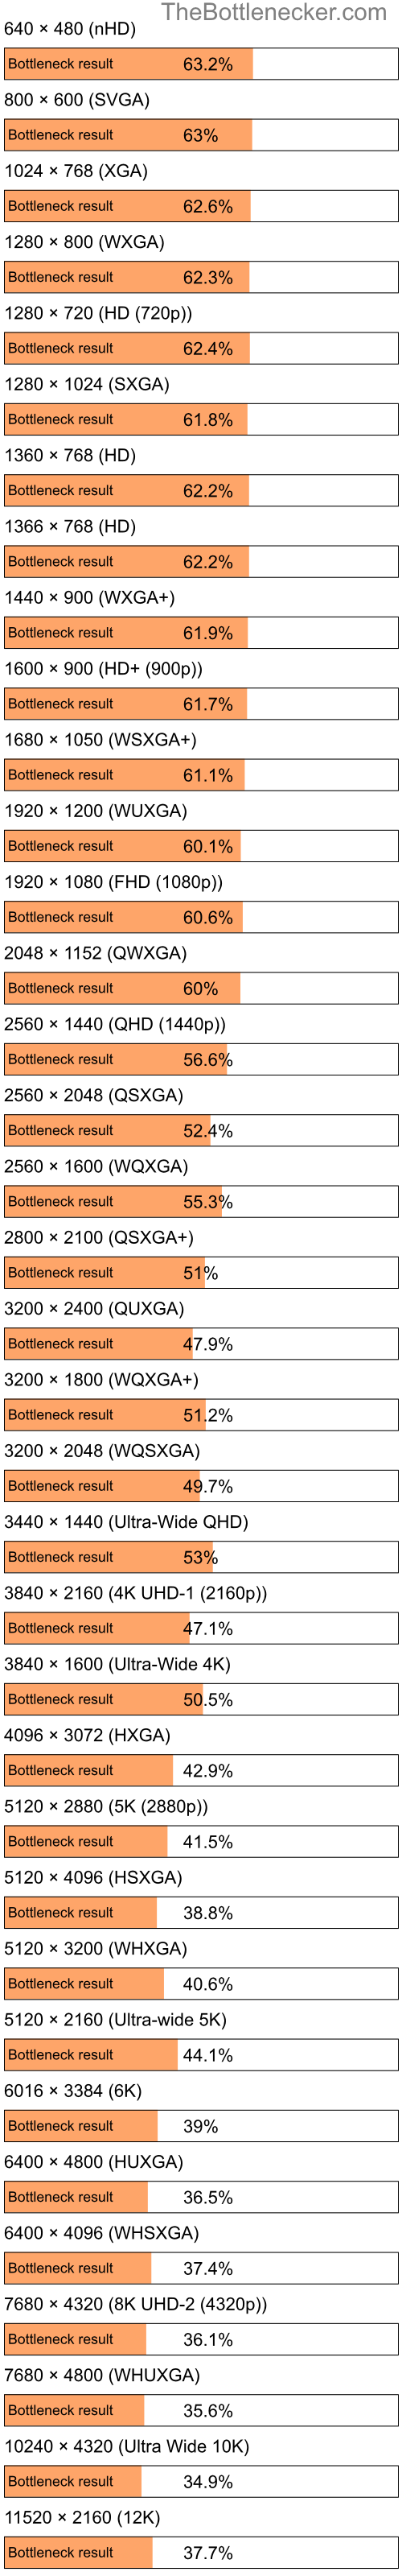 Bottleneck results by resolution for Intel Core i5-6500 and NVIDIA GeForce GTX 1080 Ti in Processor Intense Tasks